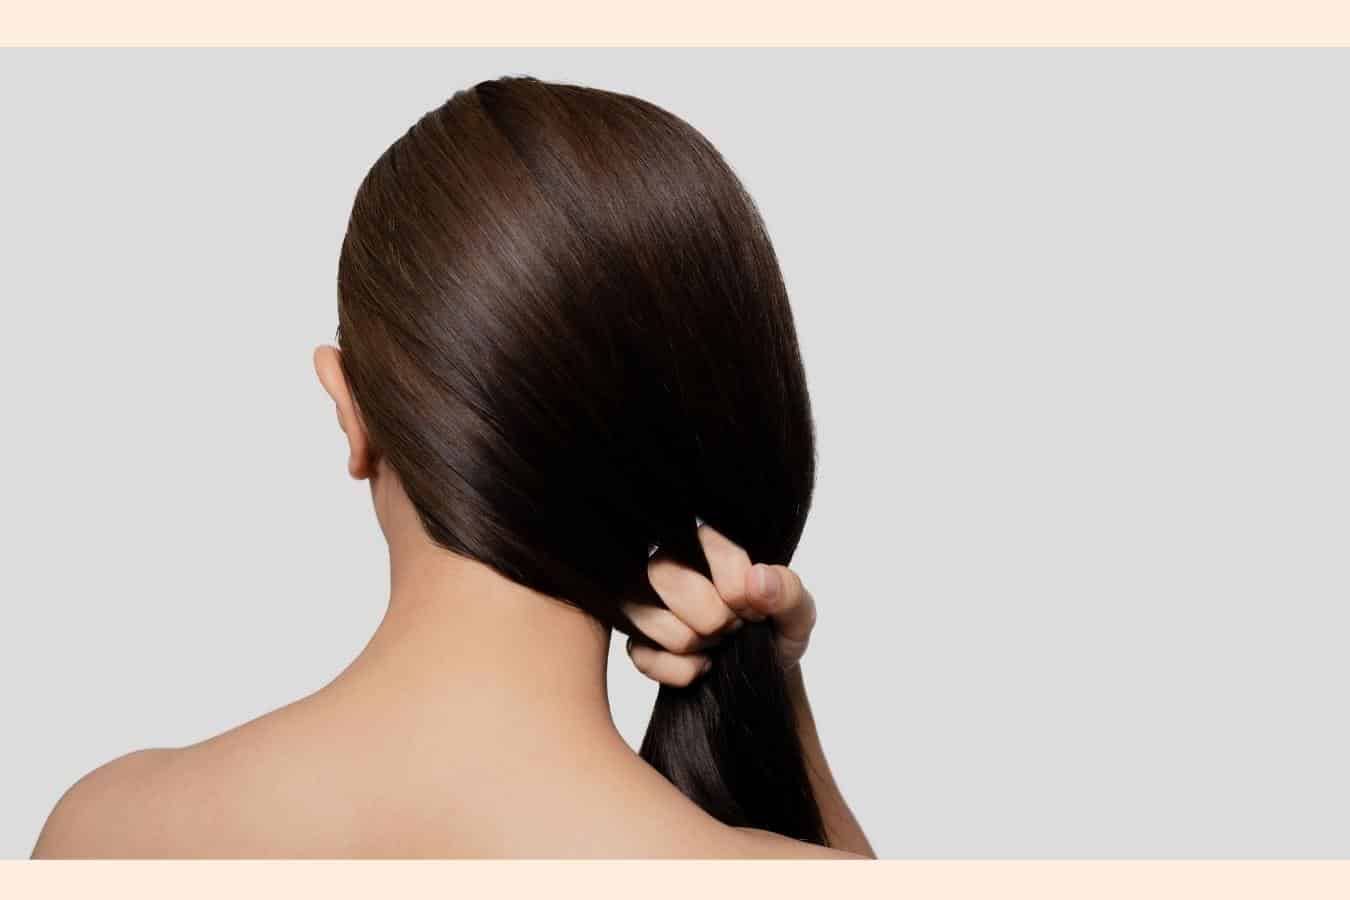 How To Use Xanthan Gum For Hair